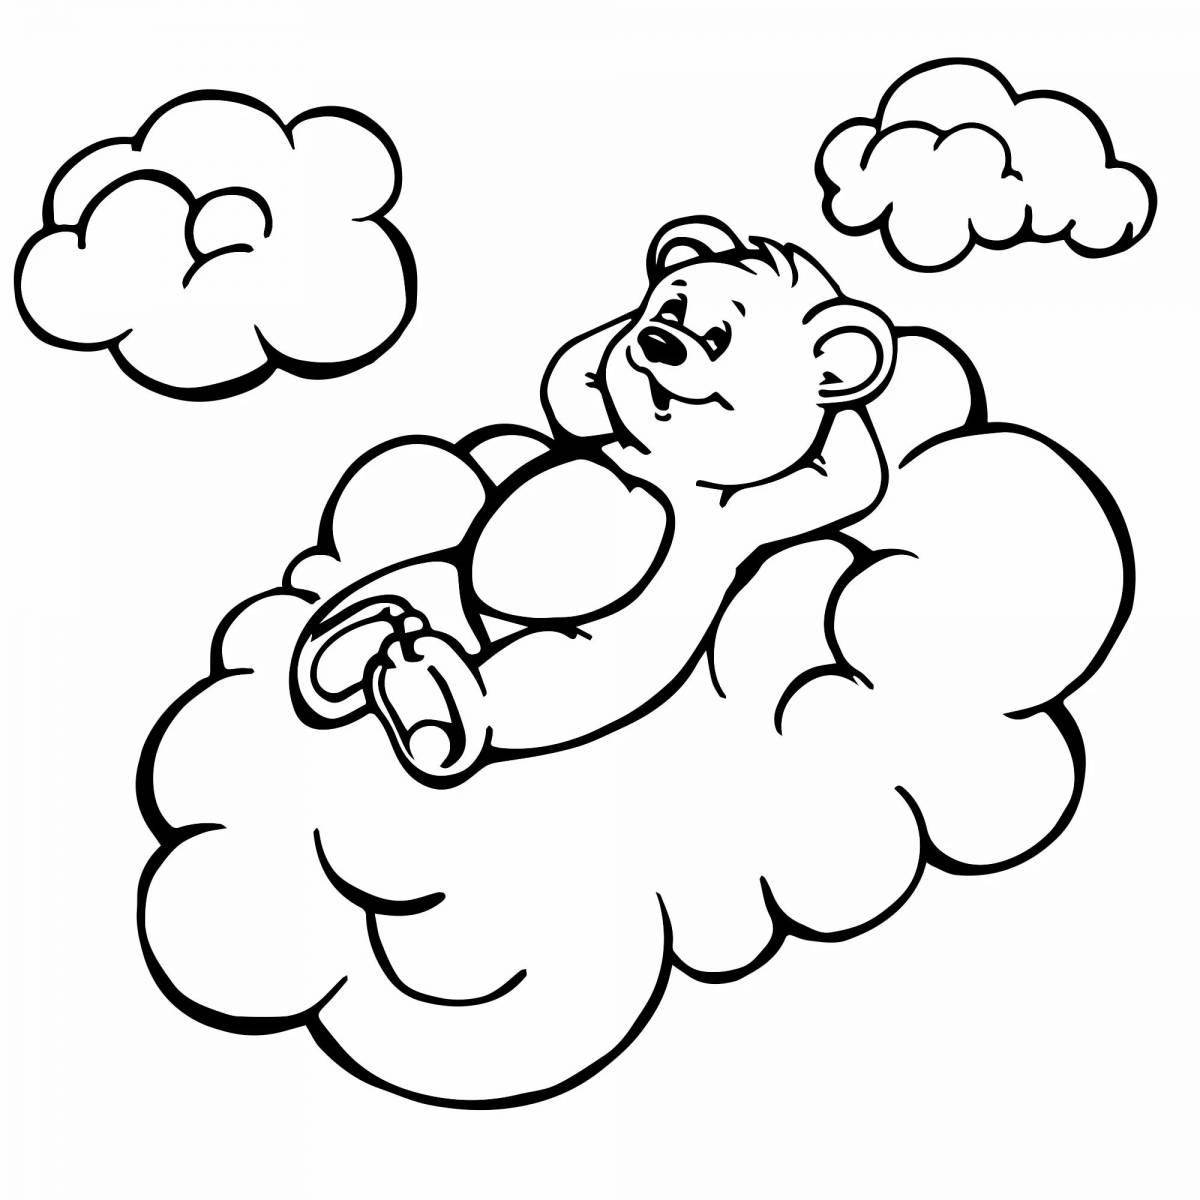 Gorgeous cloud coloring book for kids